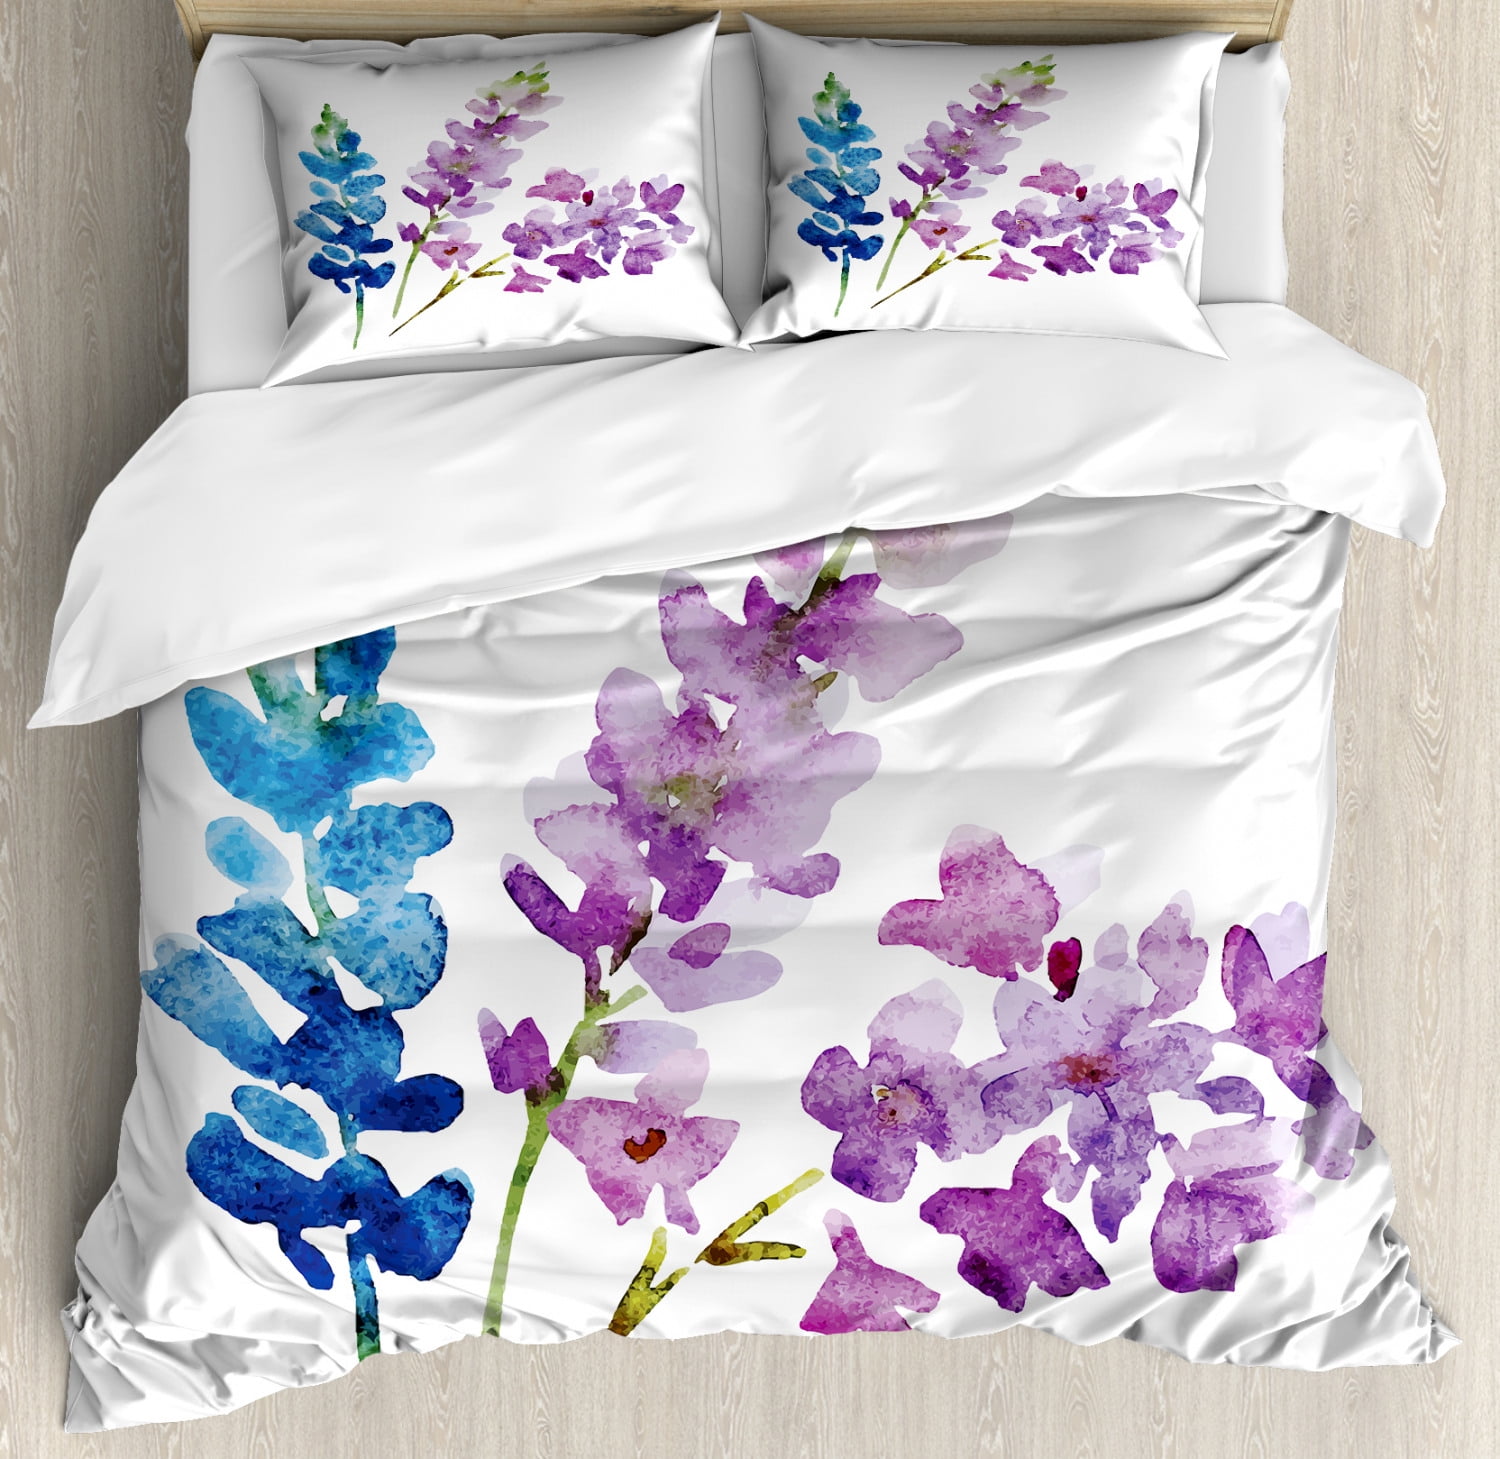 Decorative 3 Piece Bedding Set with 2 Pillow Shams Floral Patterned Illustration with Leaves and Wildflowers Abstract Botanical Violet Blue Queen Size Ambesonne Watercolor Duvet Cover Set